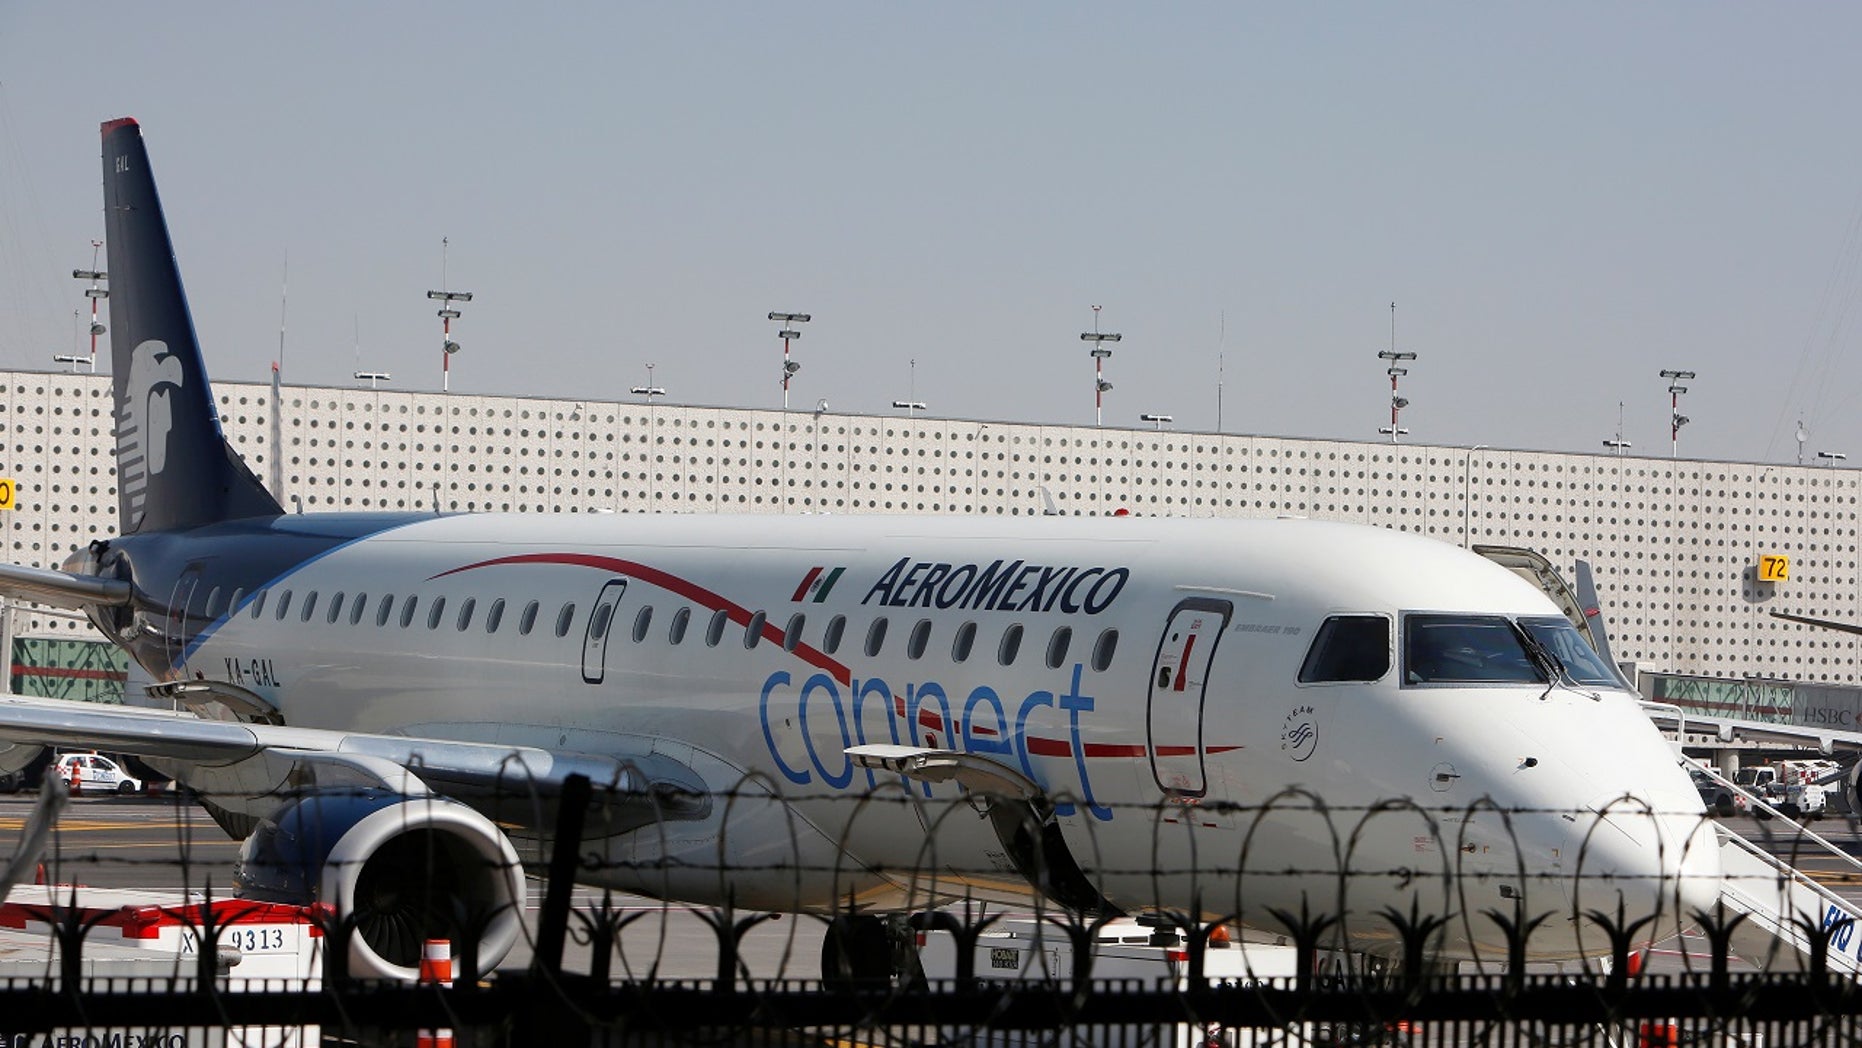 Aeromexico flight stranded on tarmac 4 hours; two ‘upset’ passengers arrested, police say